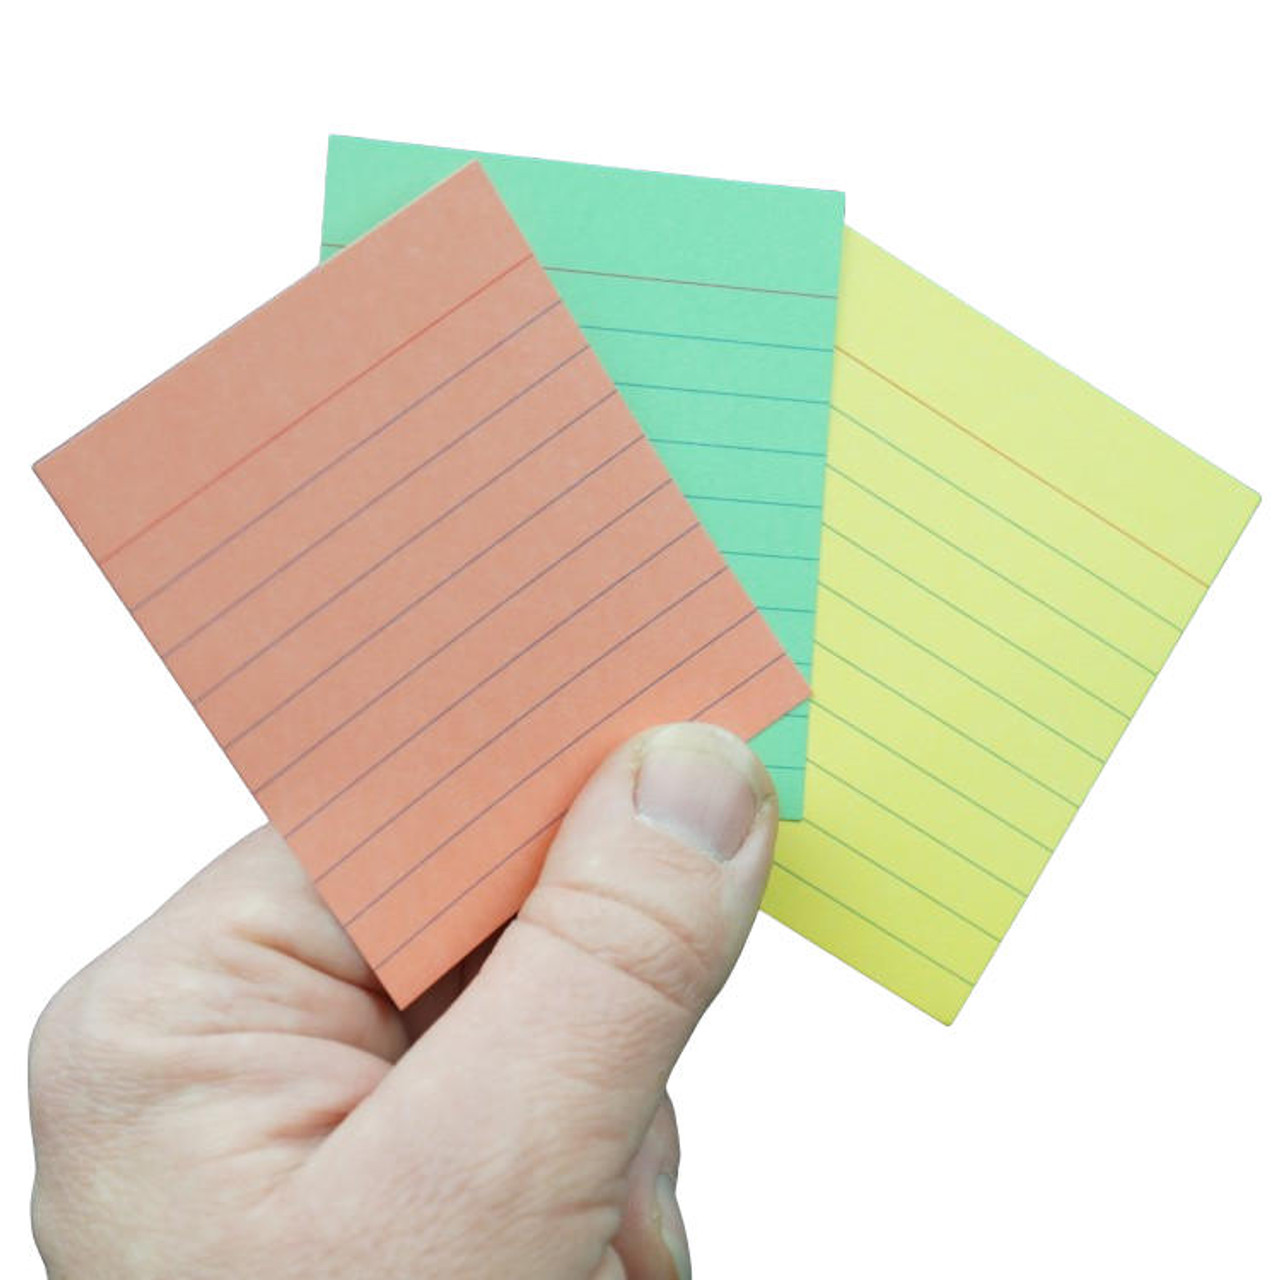 MEAD HALF-SIZED COLOR INDEX CARDS 3 X 2.5